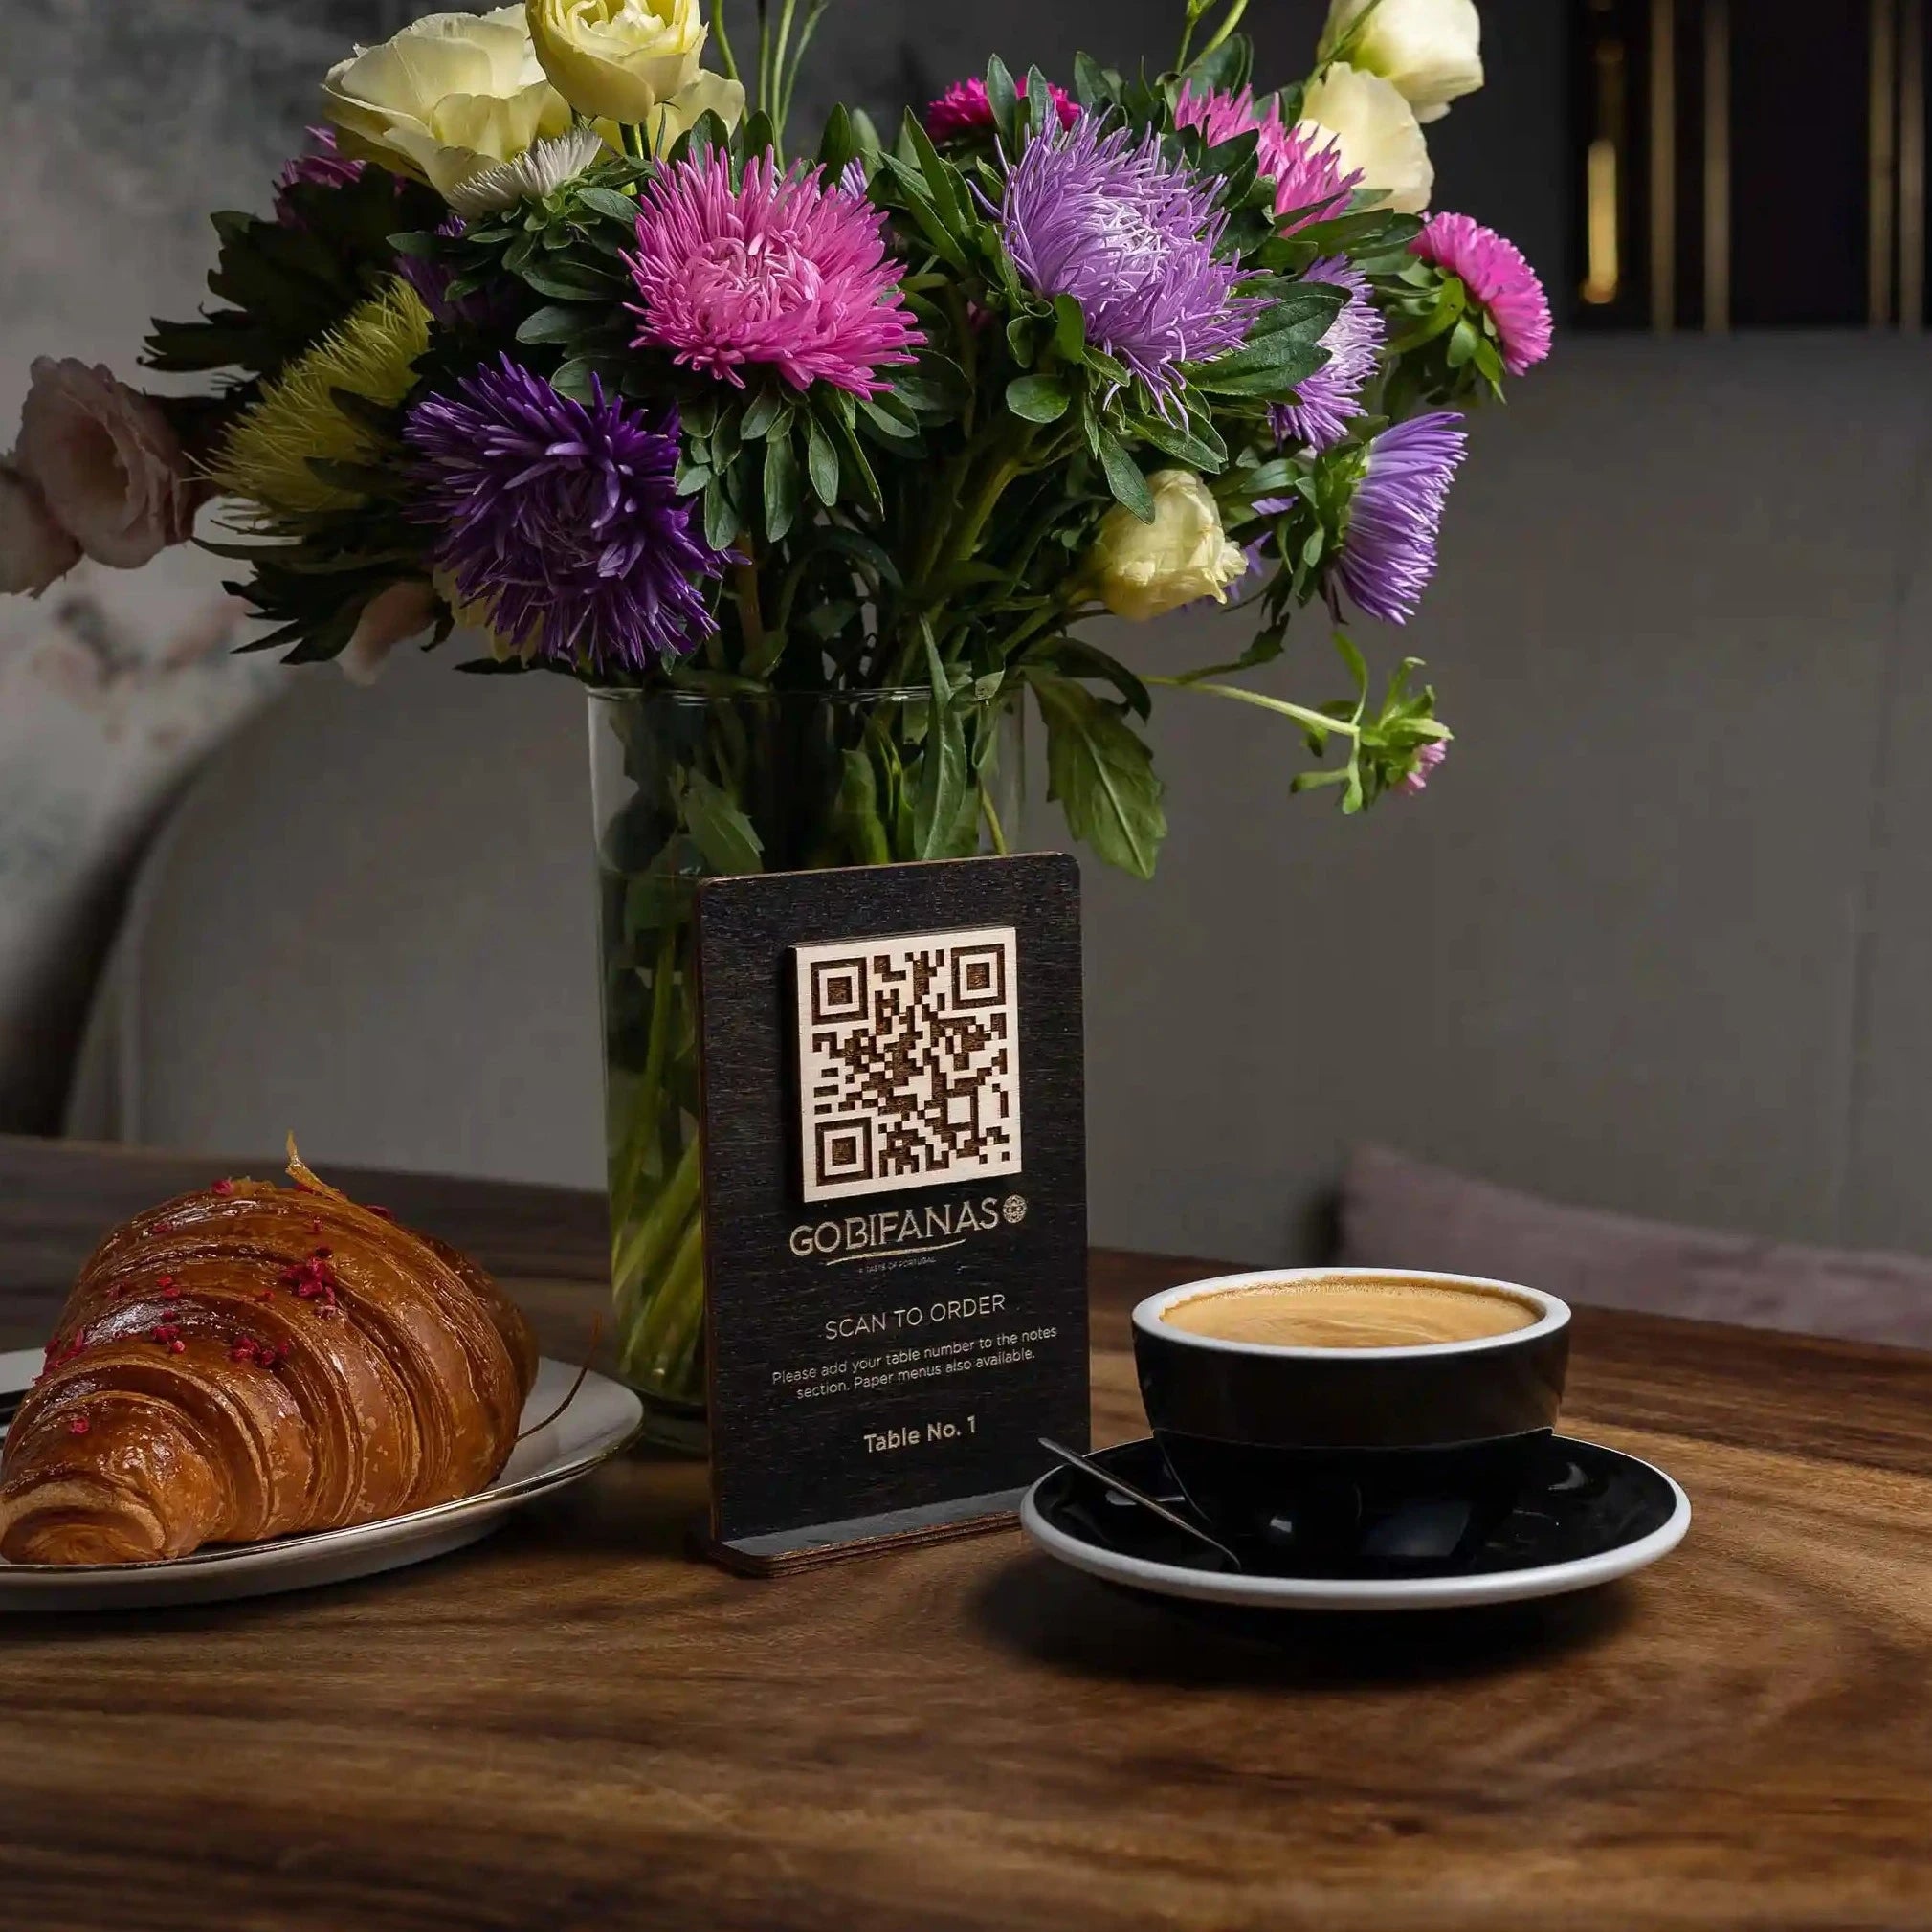 Touchless Menu Sign for cafes and bars. Scannable QR code for easy access to menus and prices, enhancing customer convenience